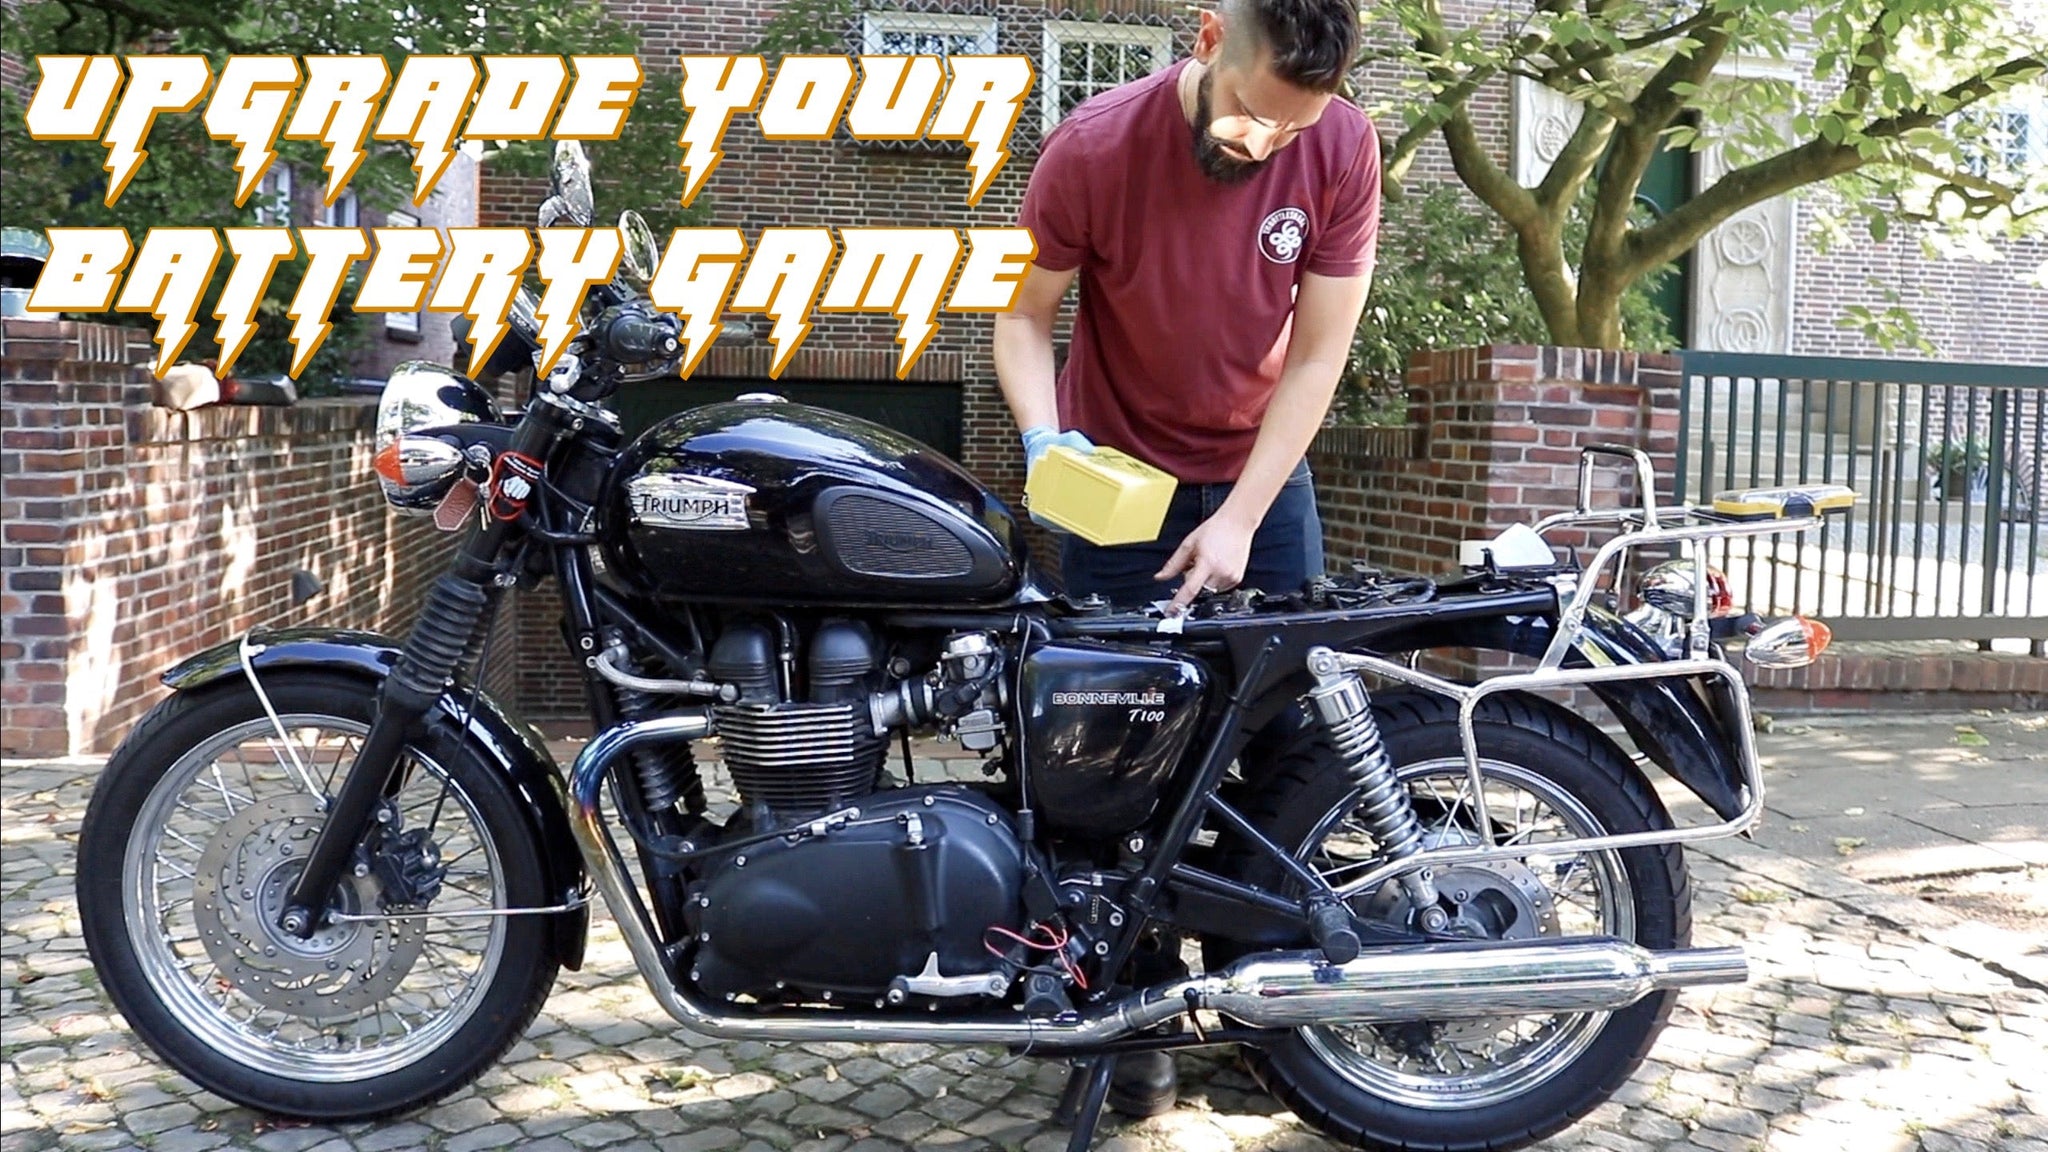 SERVICE YOUR MOTORCYCLE - Part 1